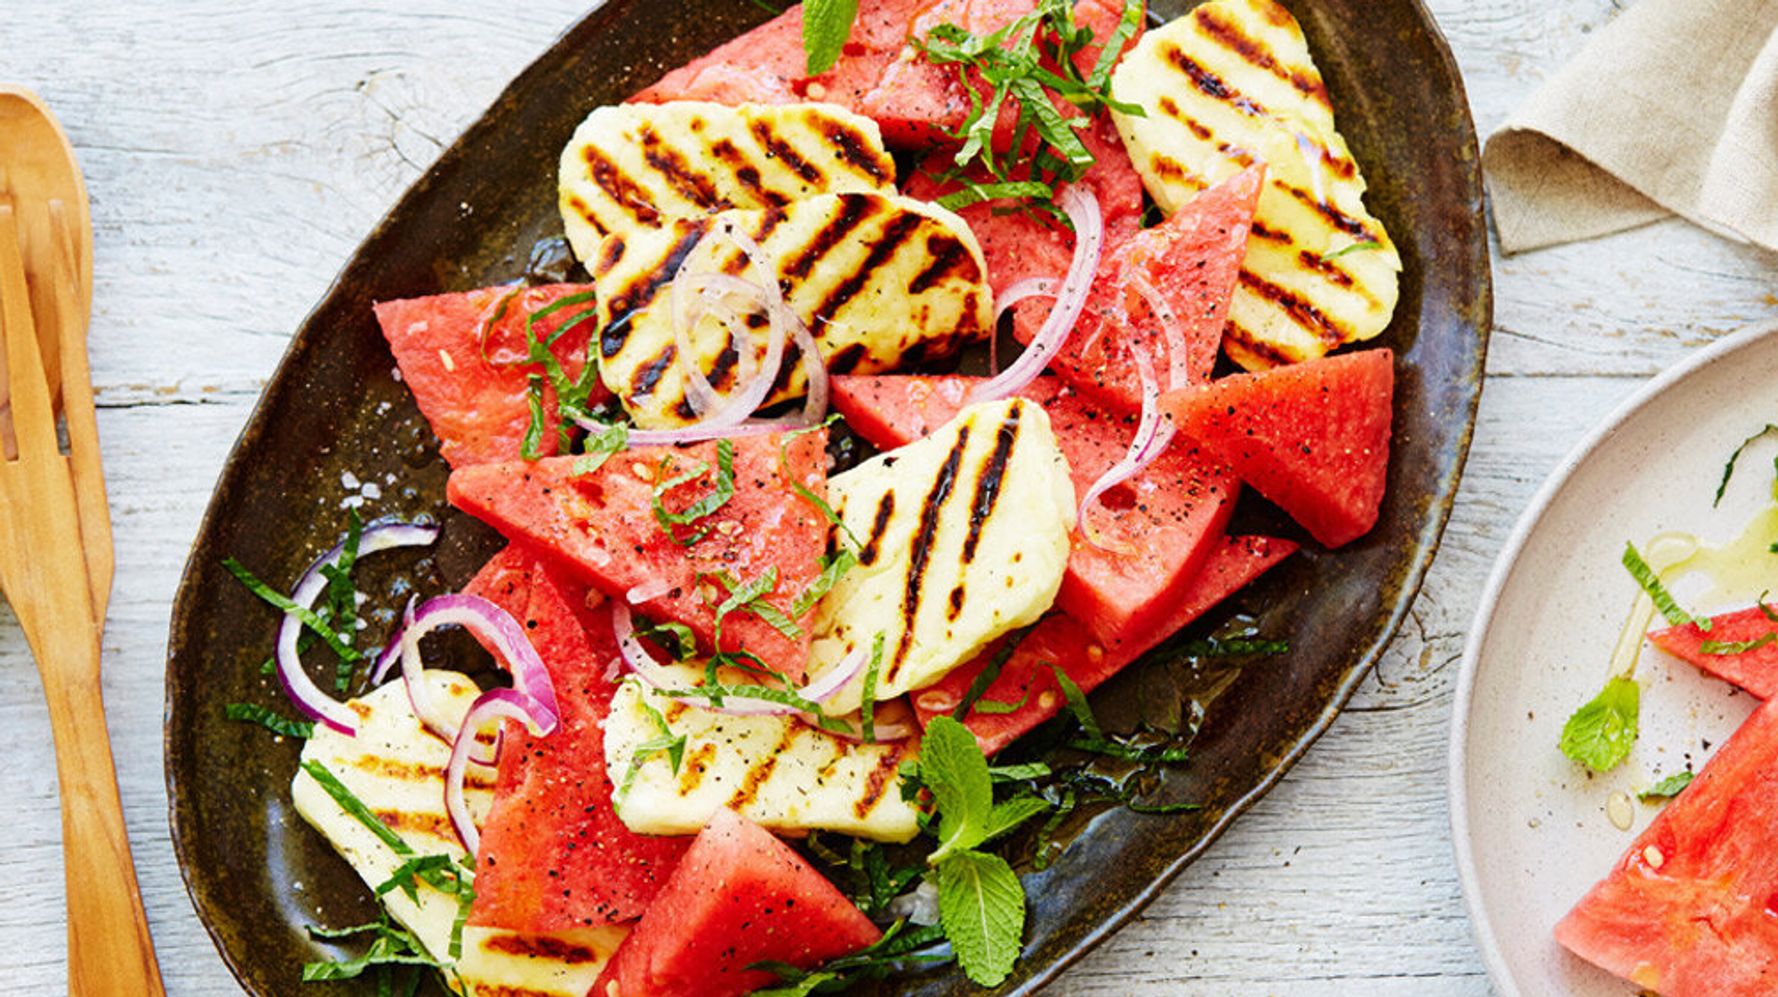 8 Easy Vegetarian Recipes That Will Make You Feel Amazing | HuffPost